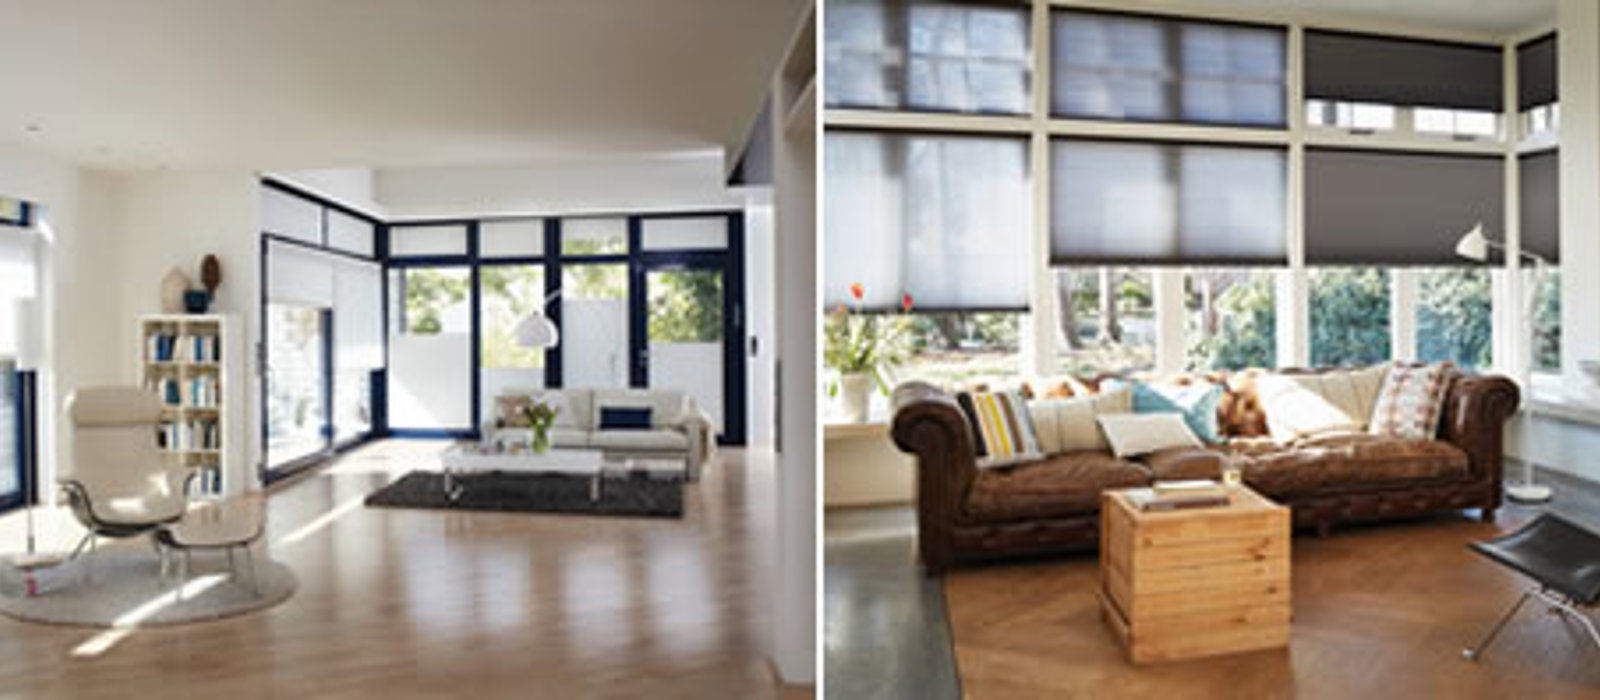 Large modern living rooms fitted with Duette blinds for large windows